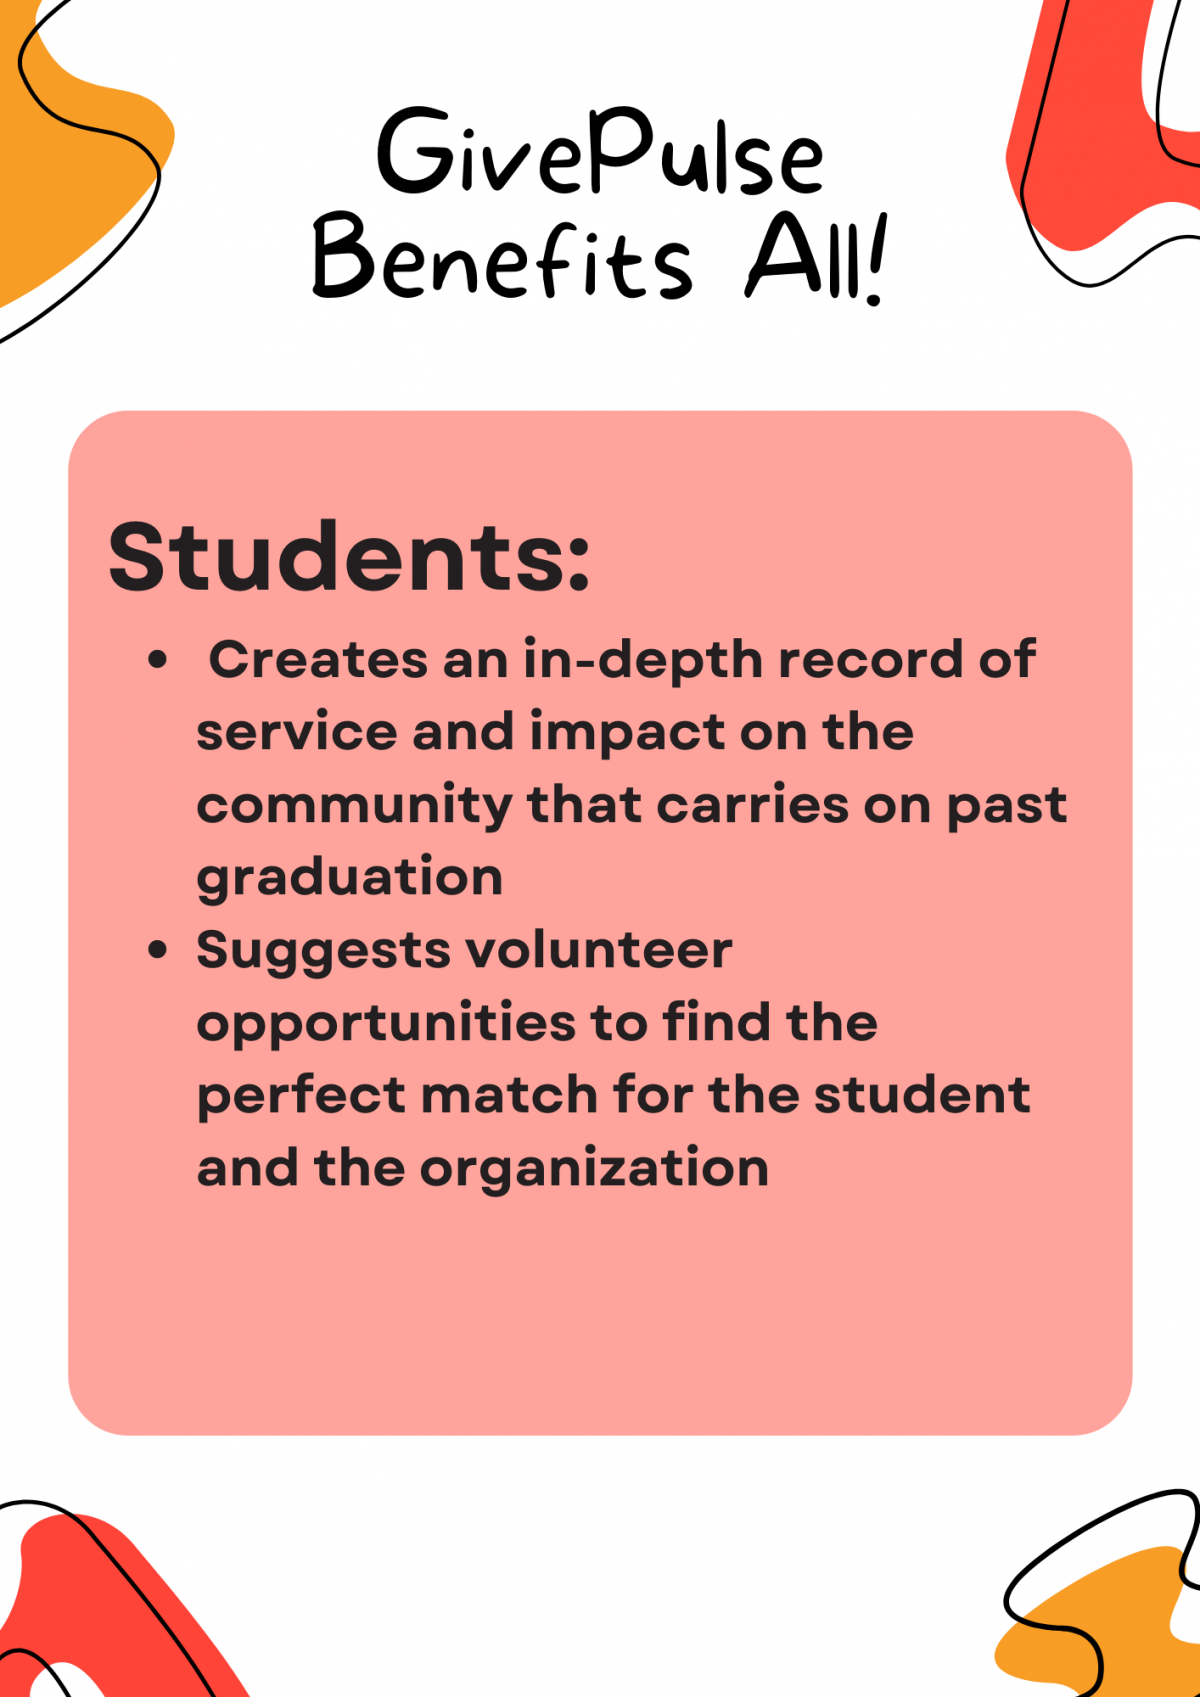 GivePules benefits all: Students 